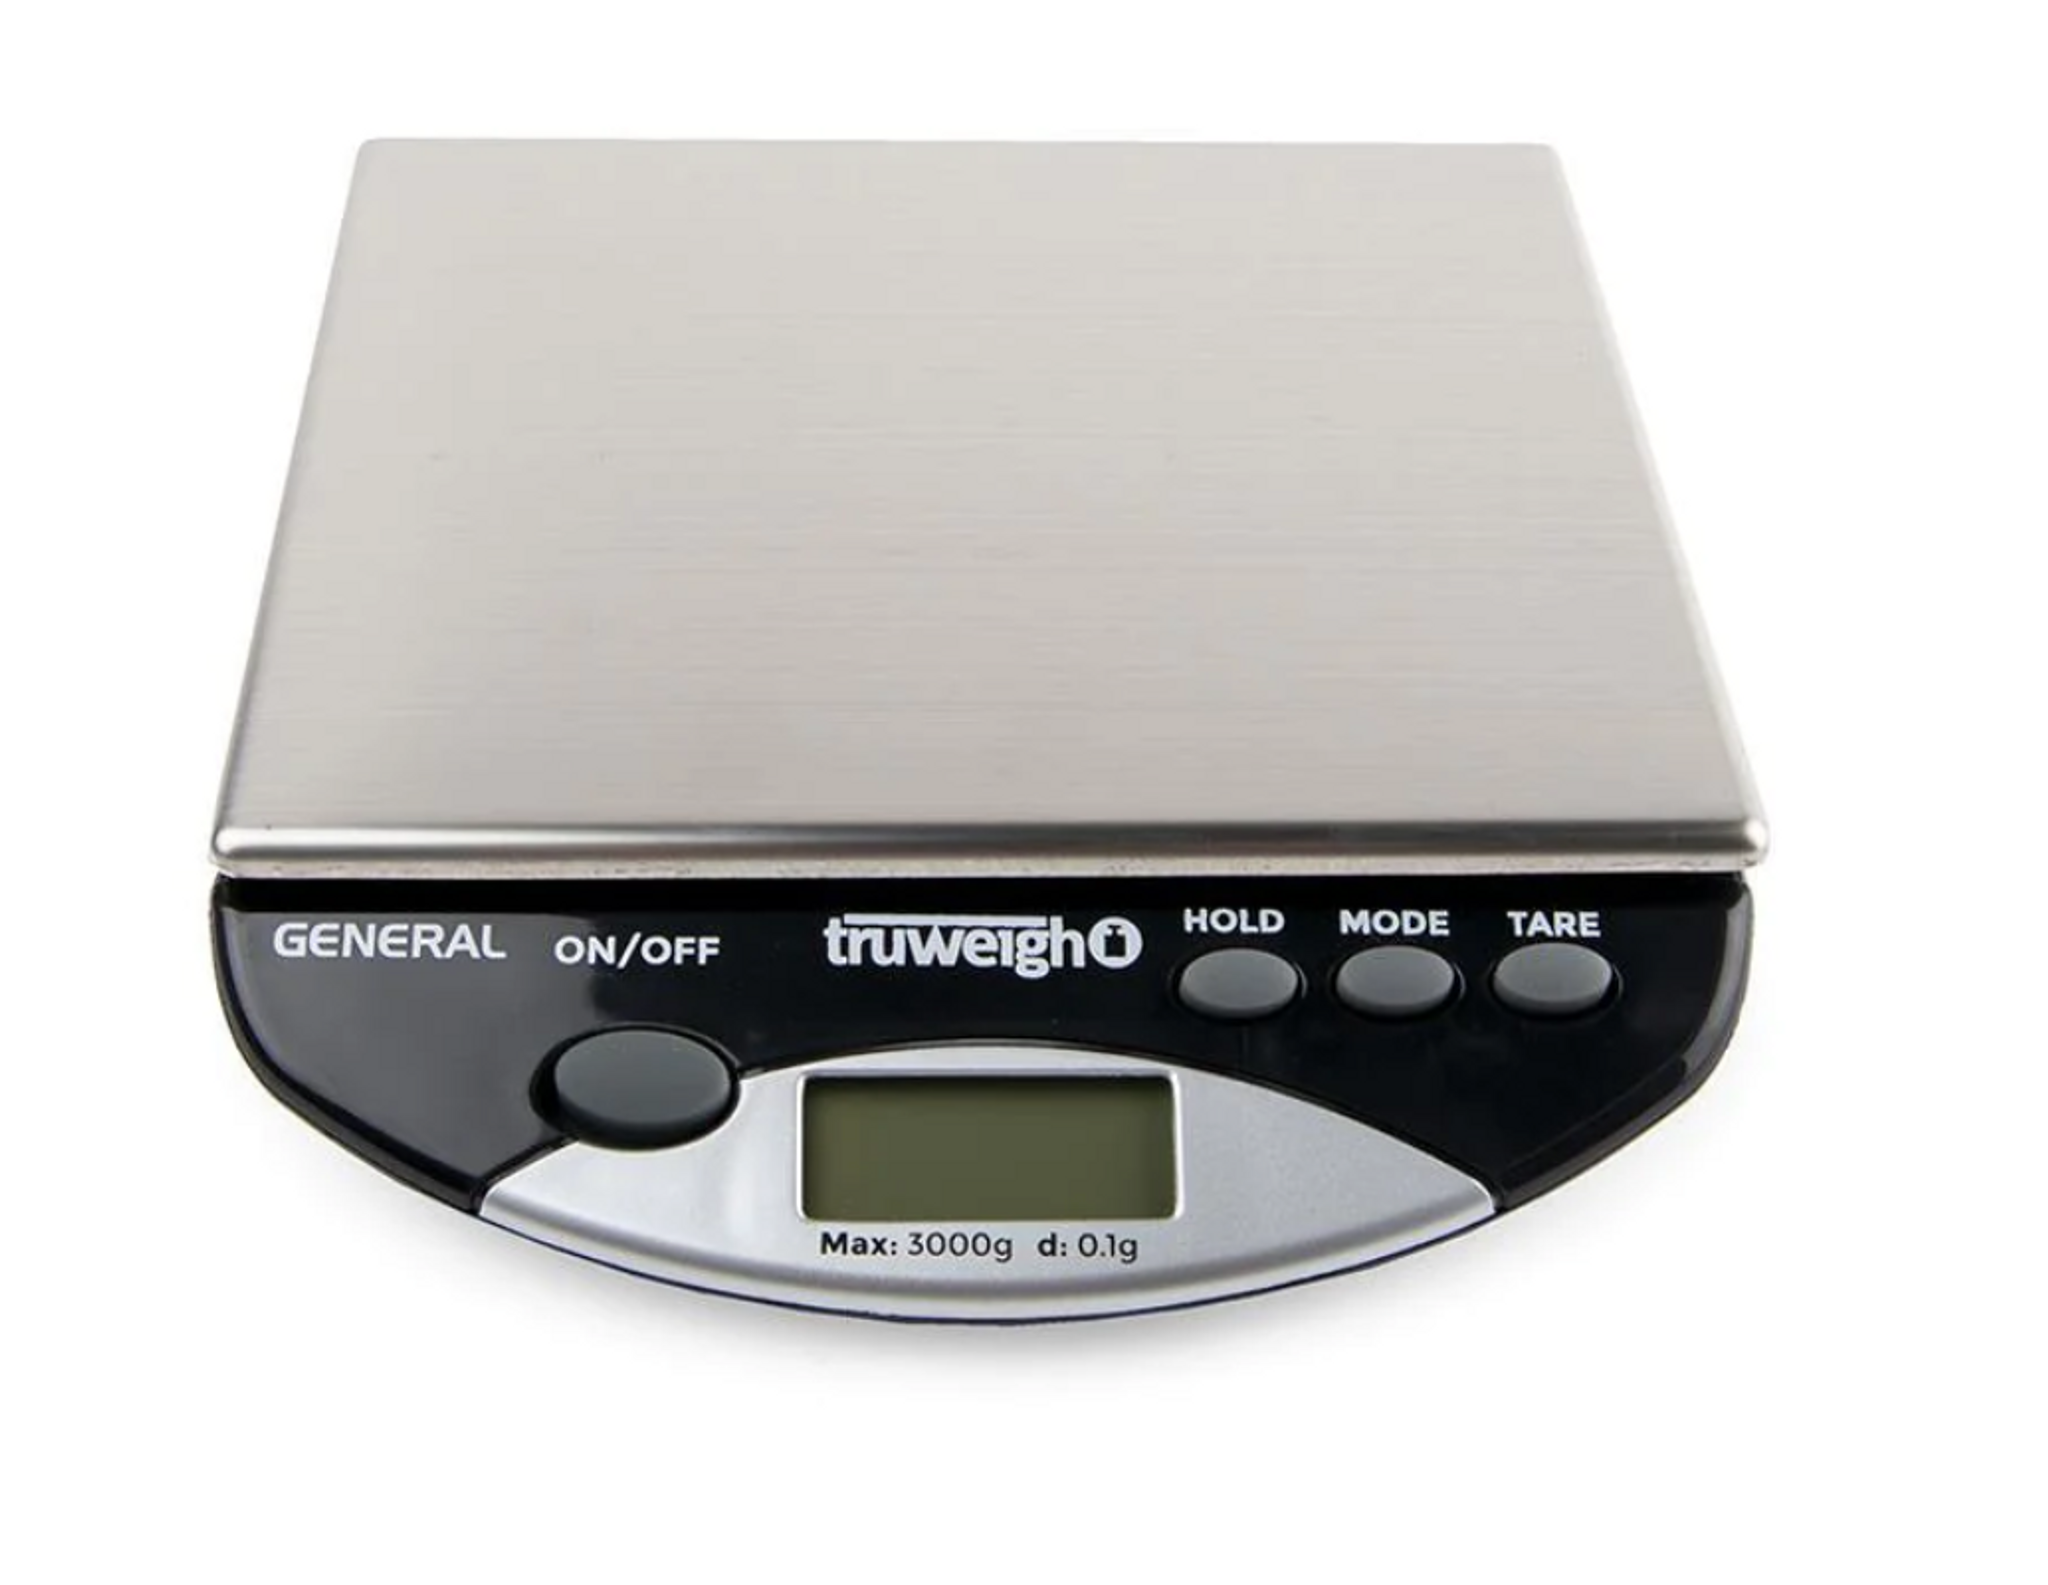 Truweigh Crimson Collapsible Bowl Digital Scale - 1000g x 0.1g - Red